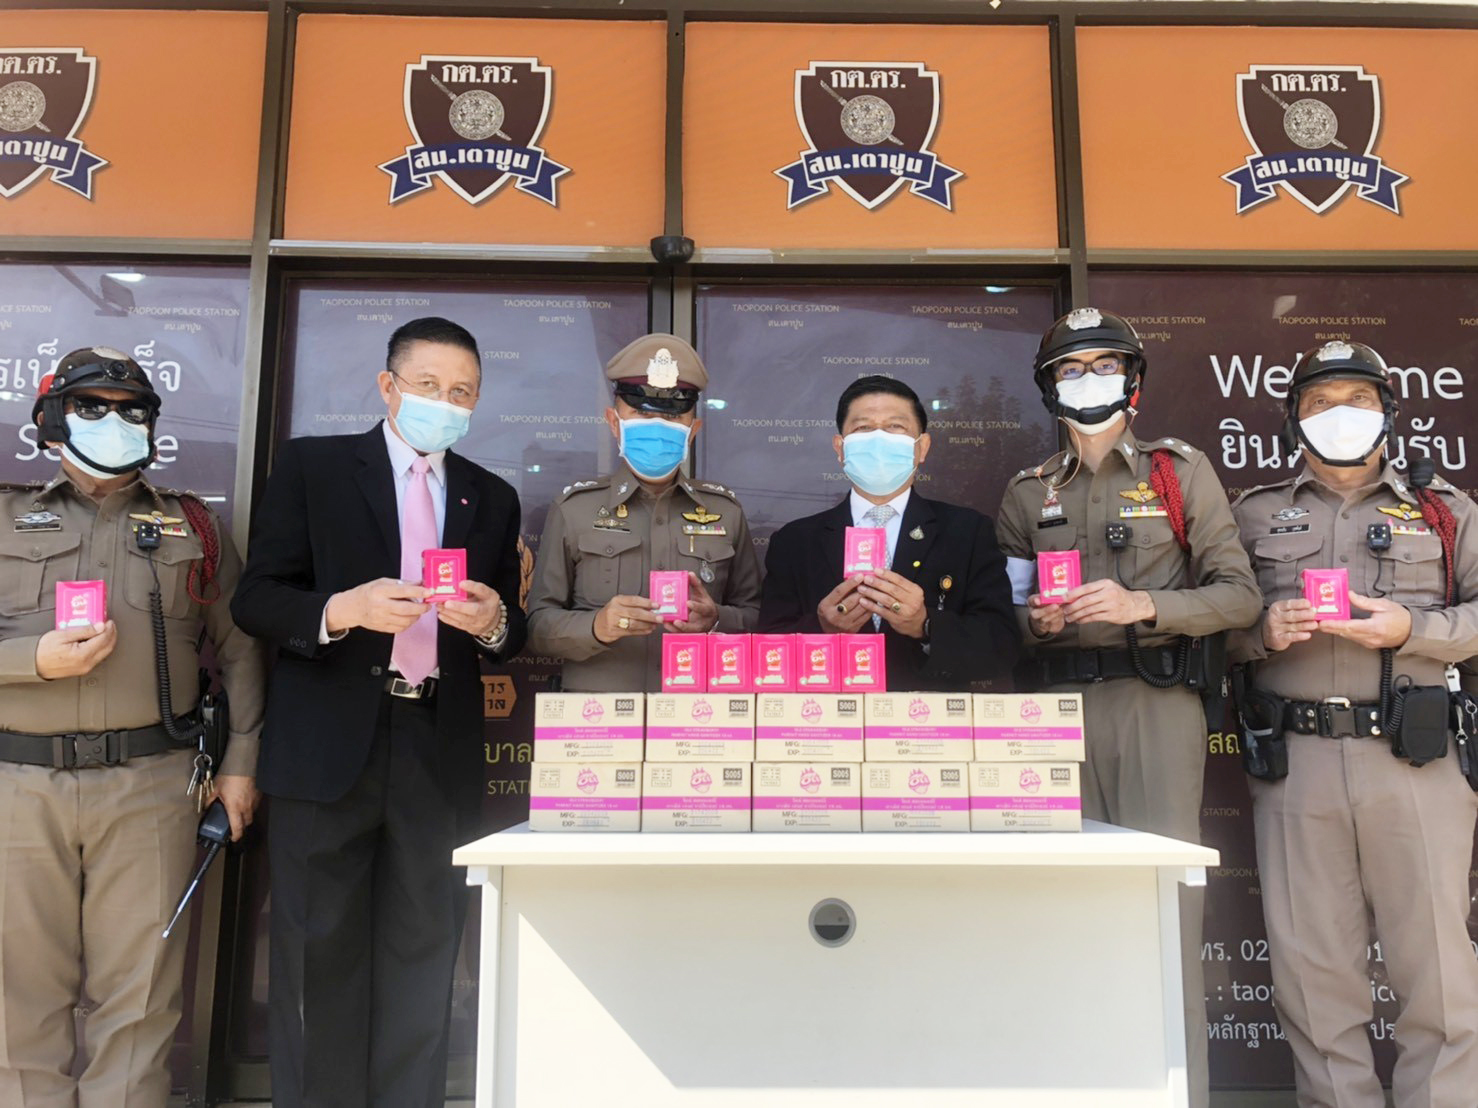 5 January 2021, at Prachachuen Police Station, Taopoon Police Station, Dusit District Office and Phaya Thai District Office